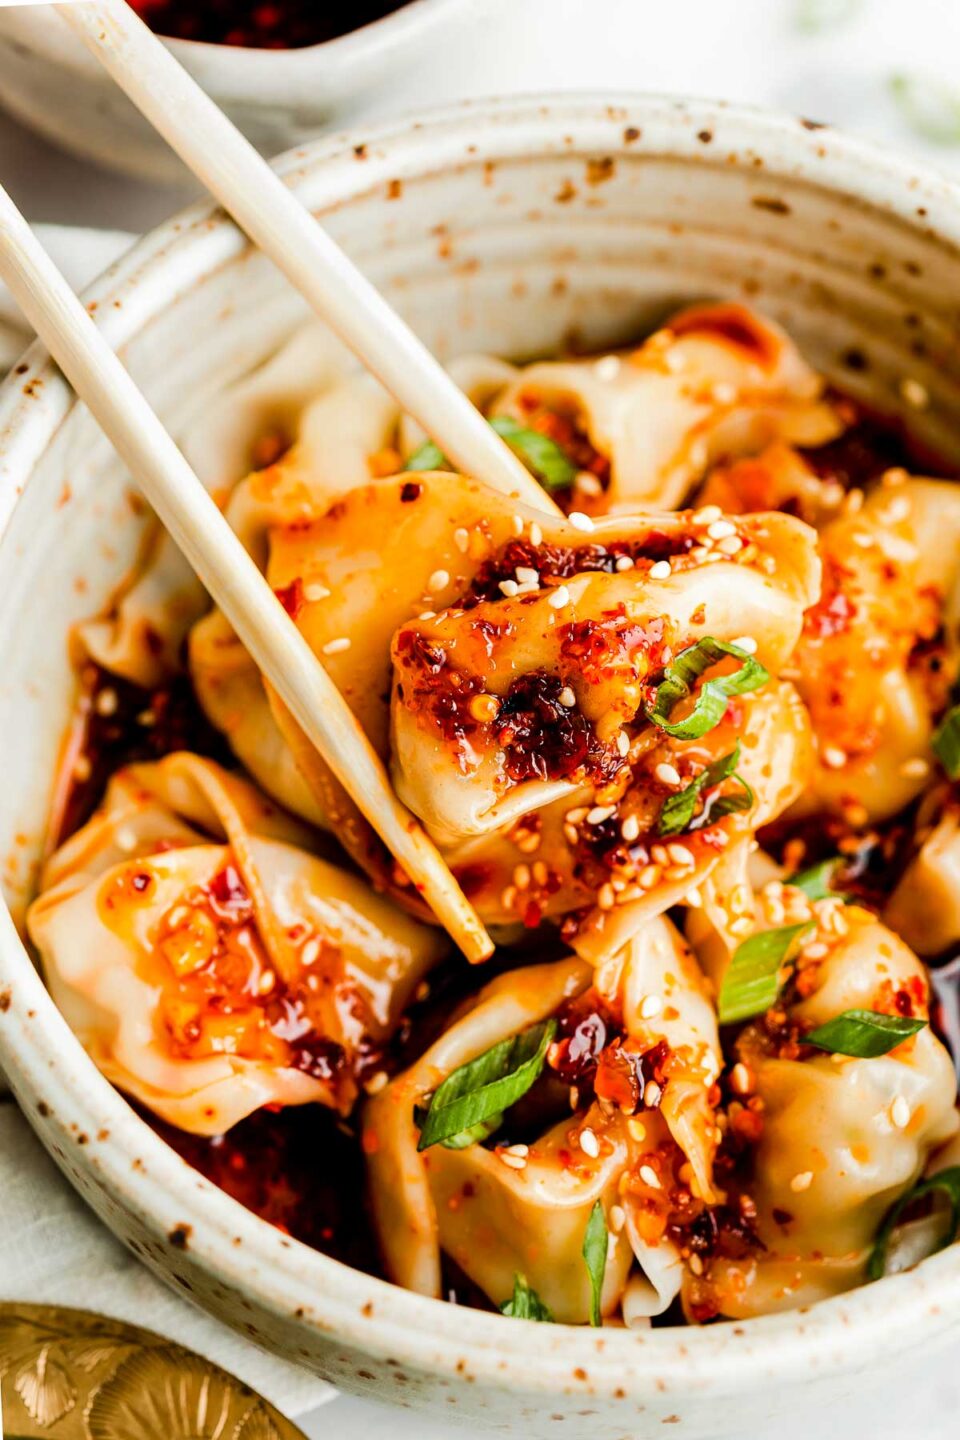 A close-up overhead shot of a bowl of cooked wontons topped with spicy chili oil, sesame seeds & green onions atop a white marbled surface. A wonton is being picked up by a pair of bamboo chopsticks.